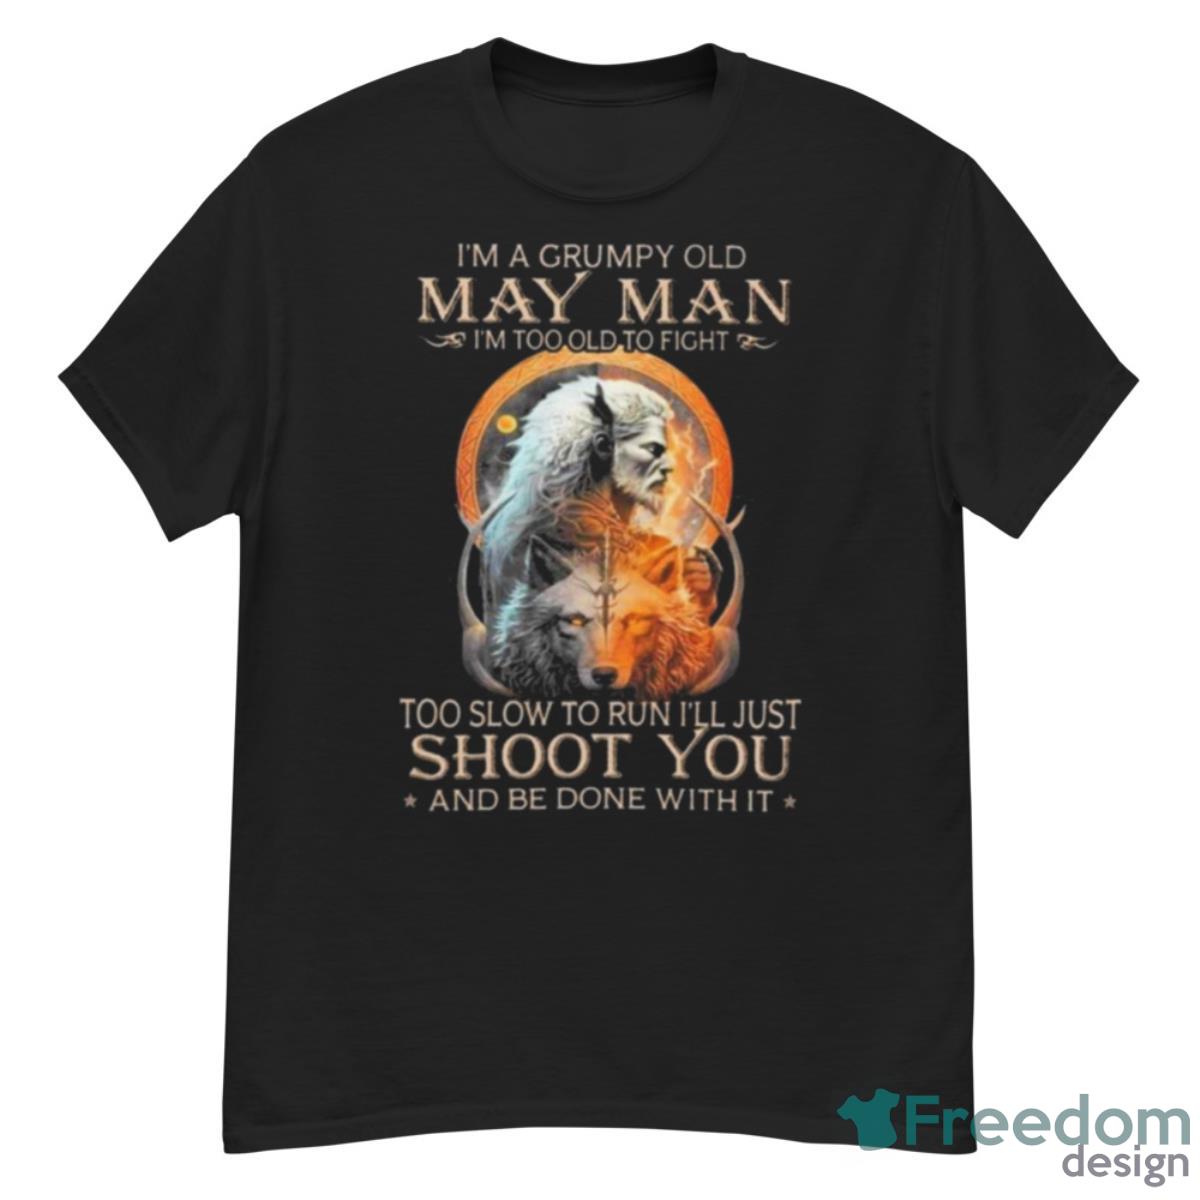 King Wolf I’m A Grumpy Old May Man I’m Too Old To Fight Too Slow To Run I’ll Just Shoot You And Be Done With It Shirt - G500 Men’s Classic T-Shirt